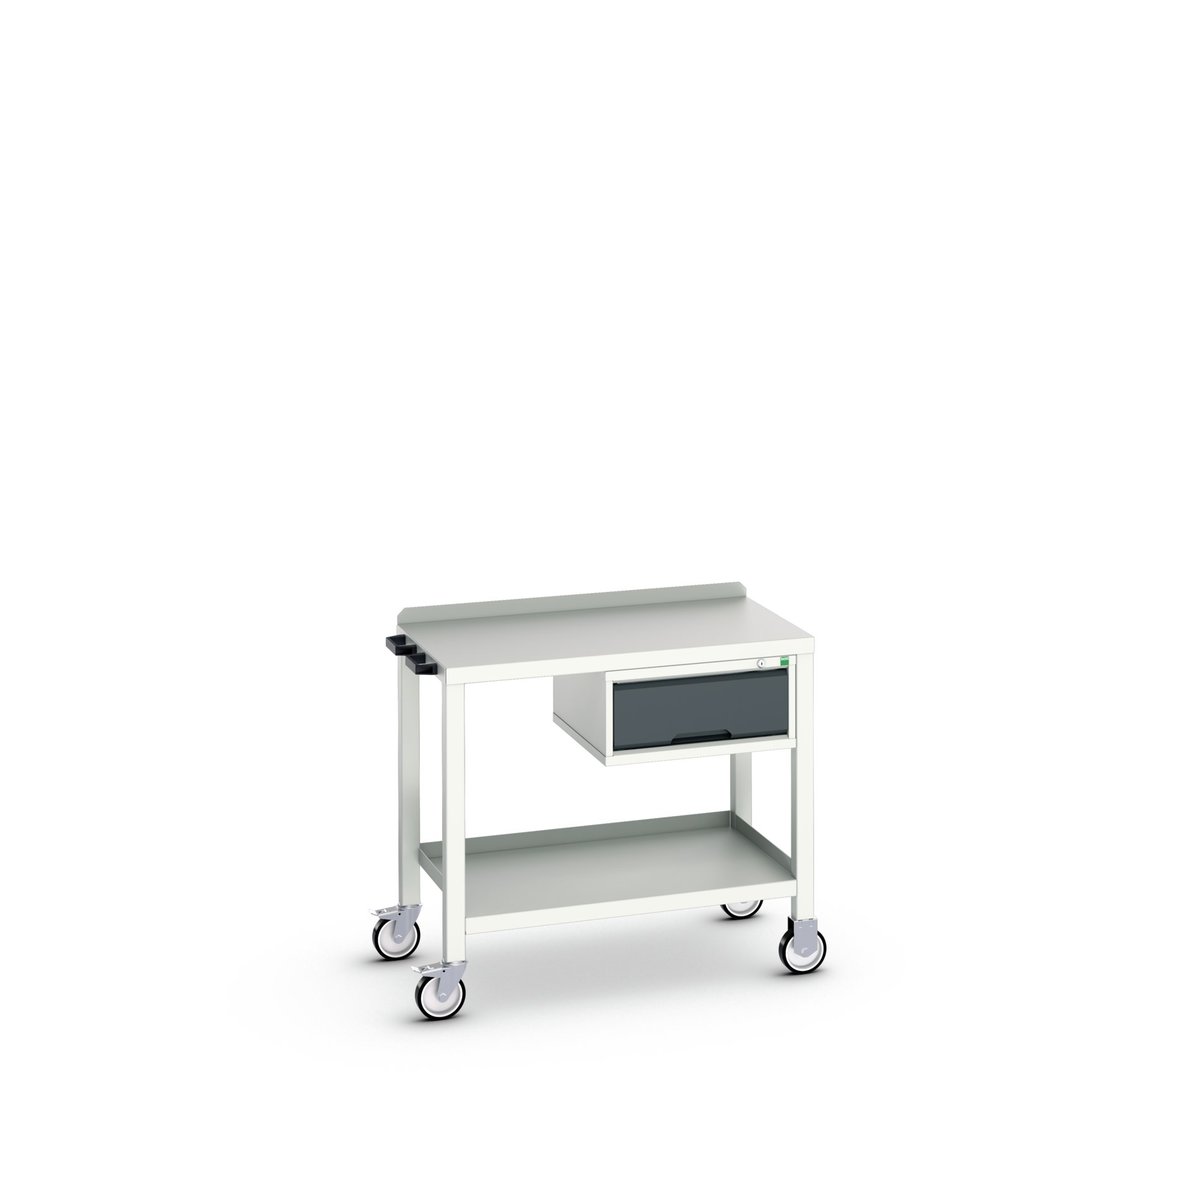 16922800. - verso mobile welded bench